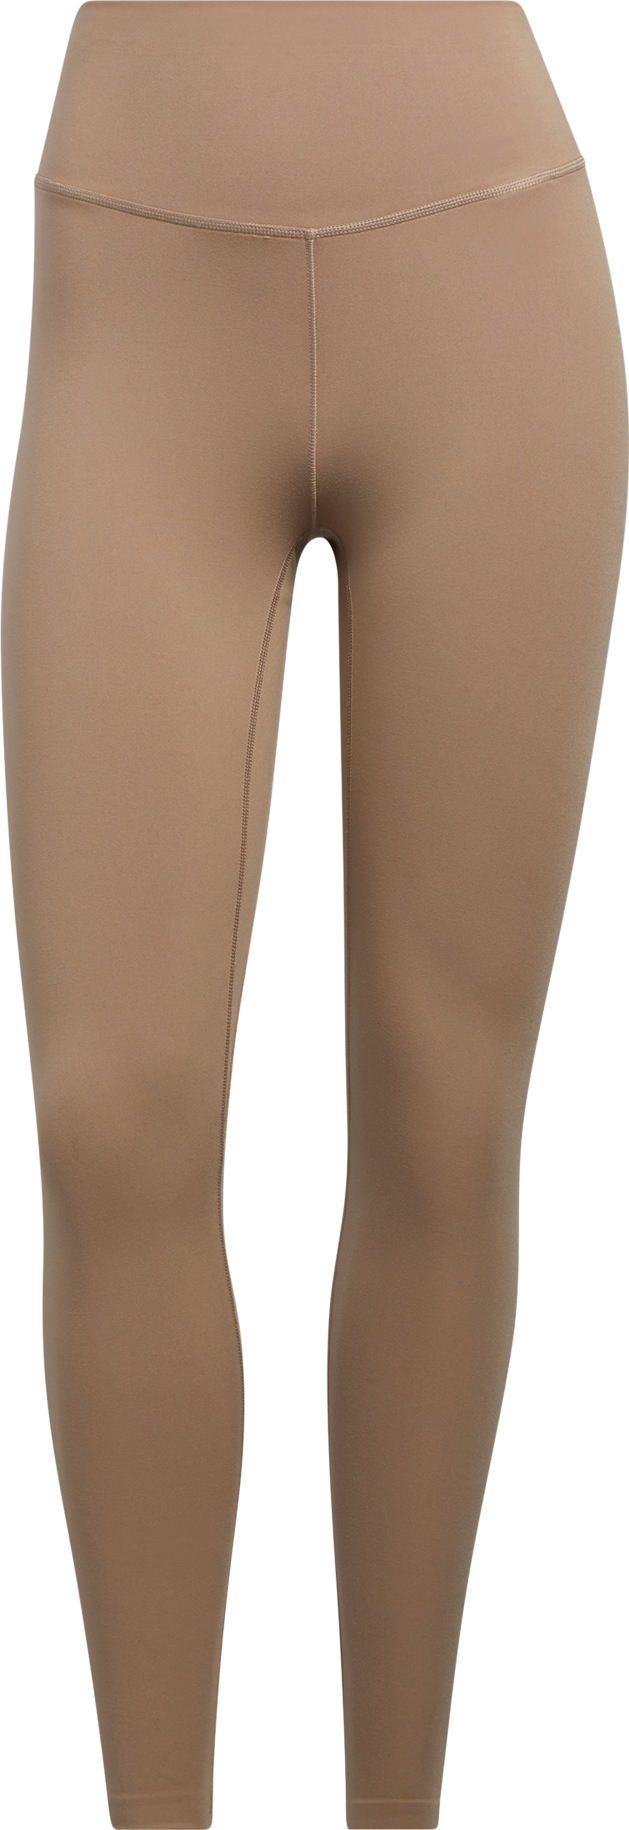 Adidas Women's Yoga Luxe Studio 7/8 Tight Chalky Brown L, Chalky Brown